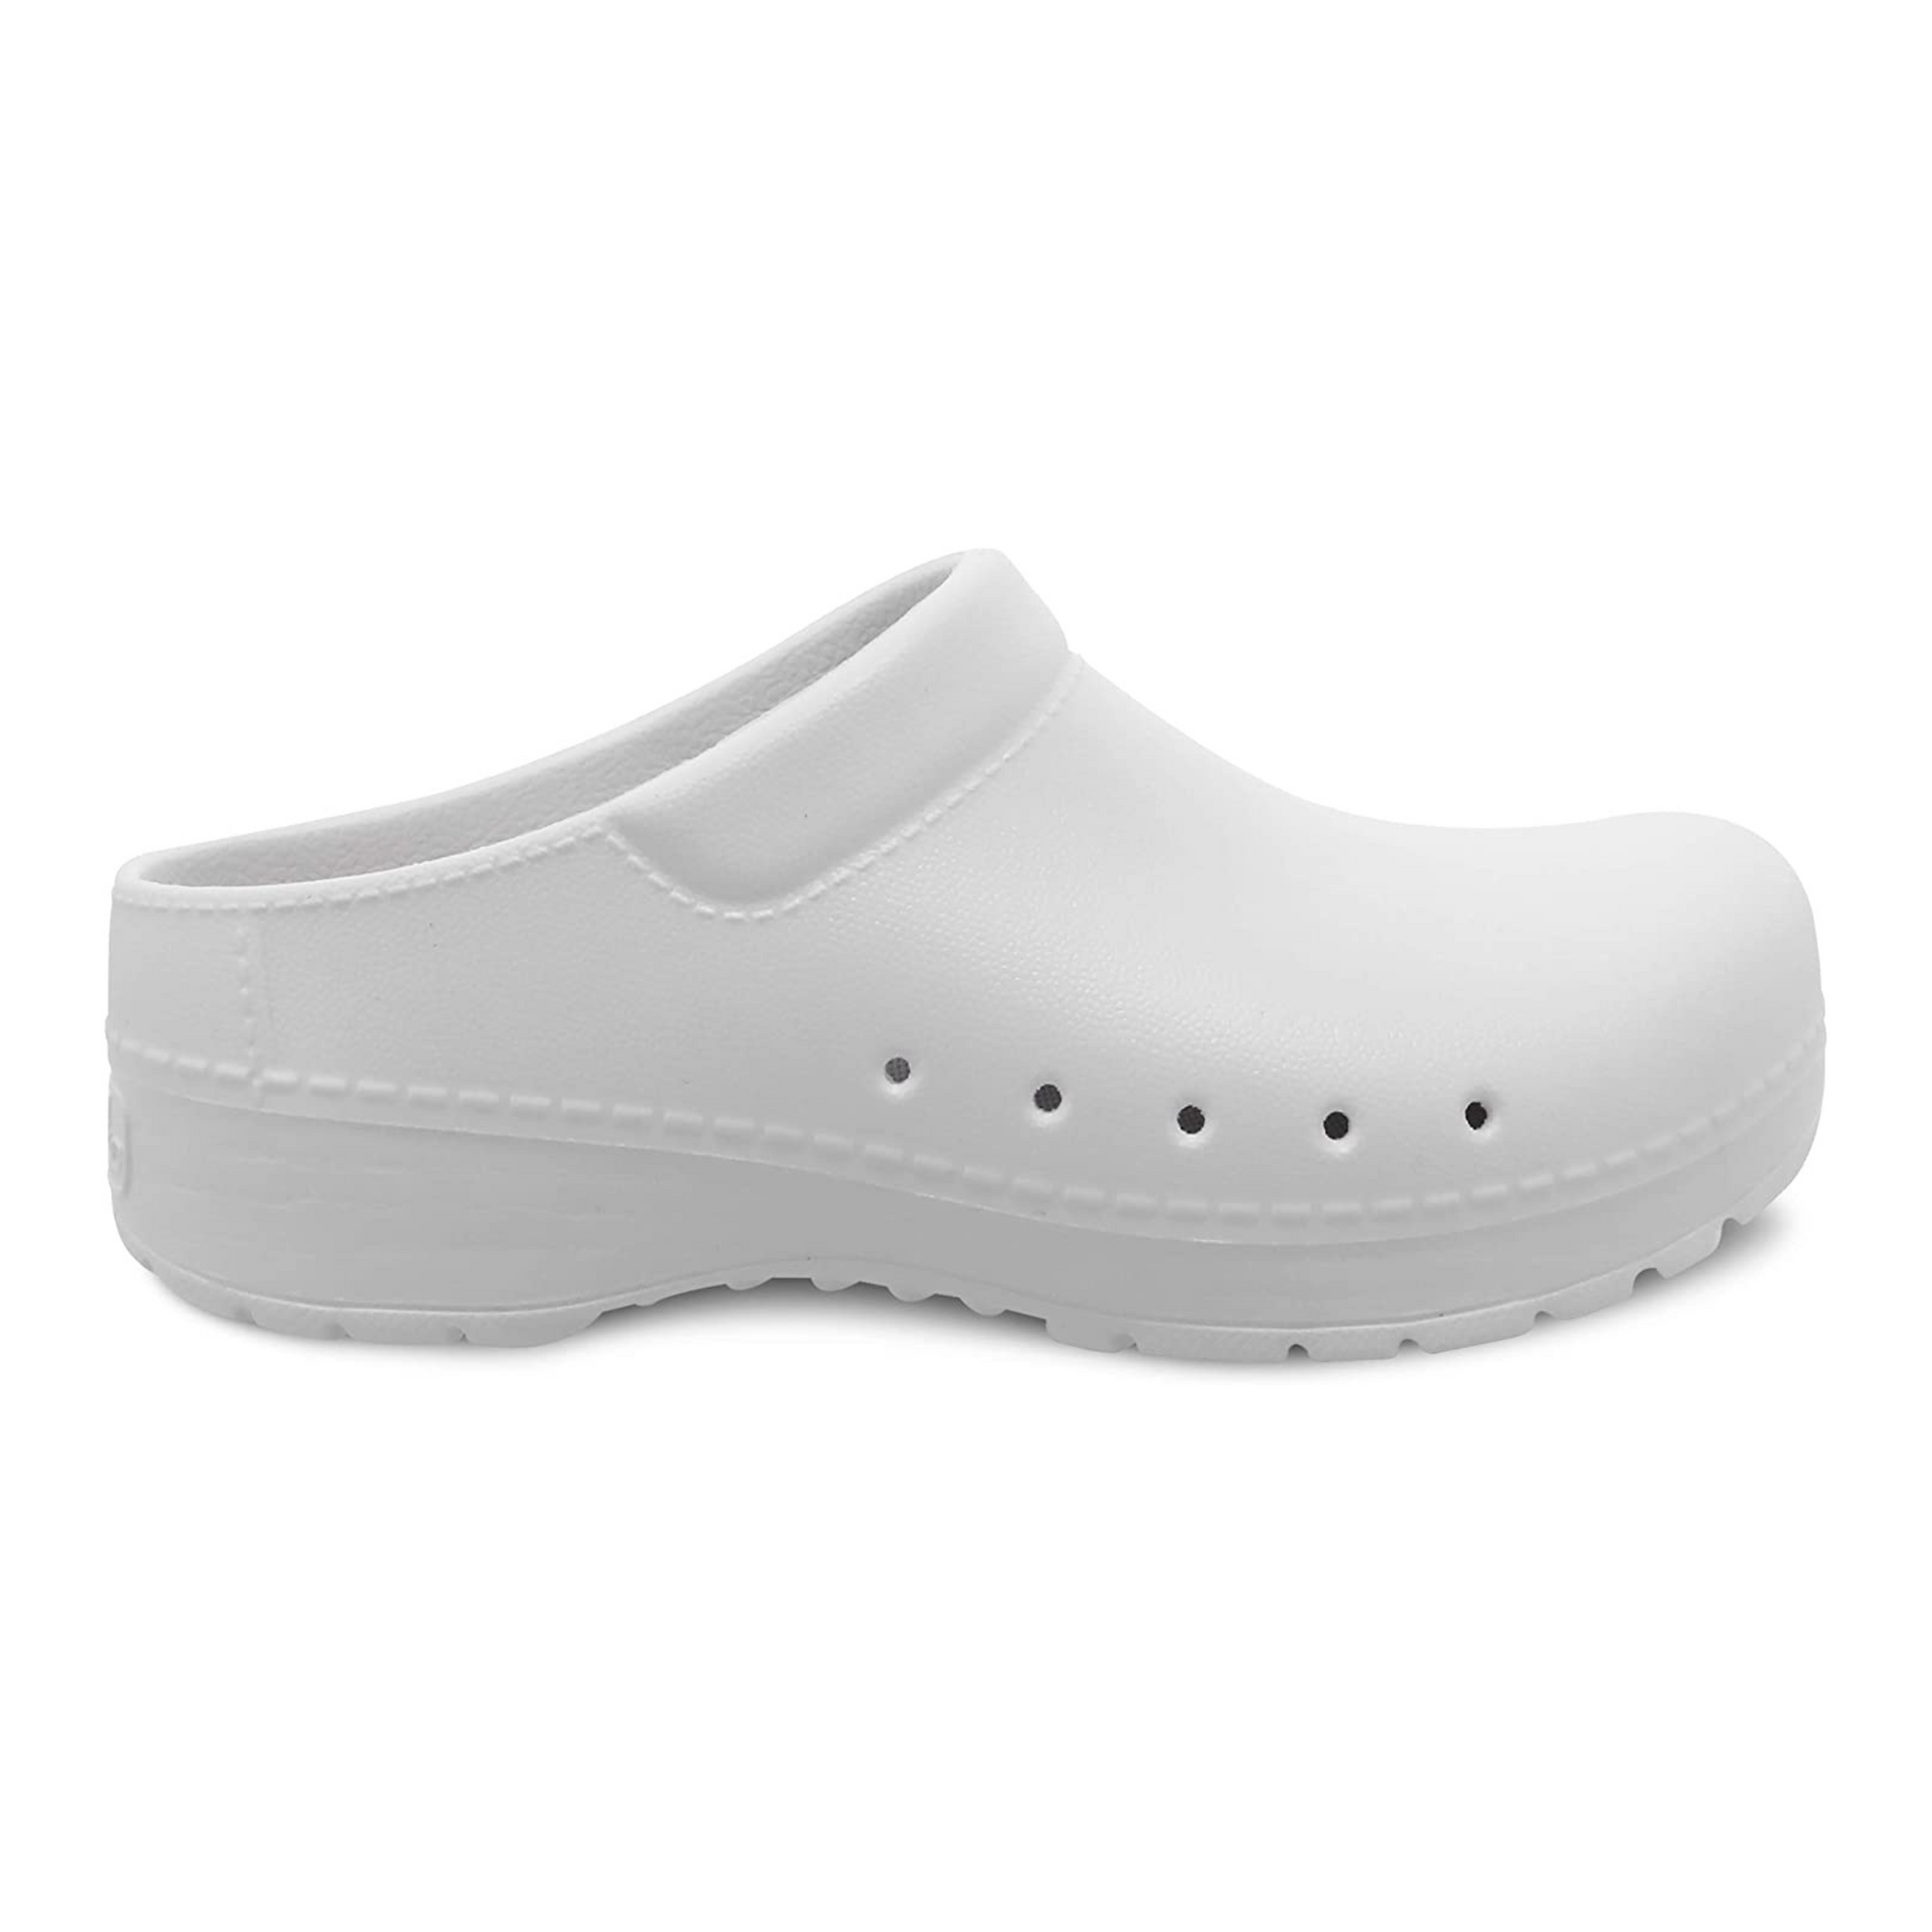 A right view of a white clog with five small holes in the side and a light purple insole.